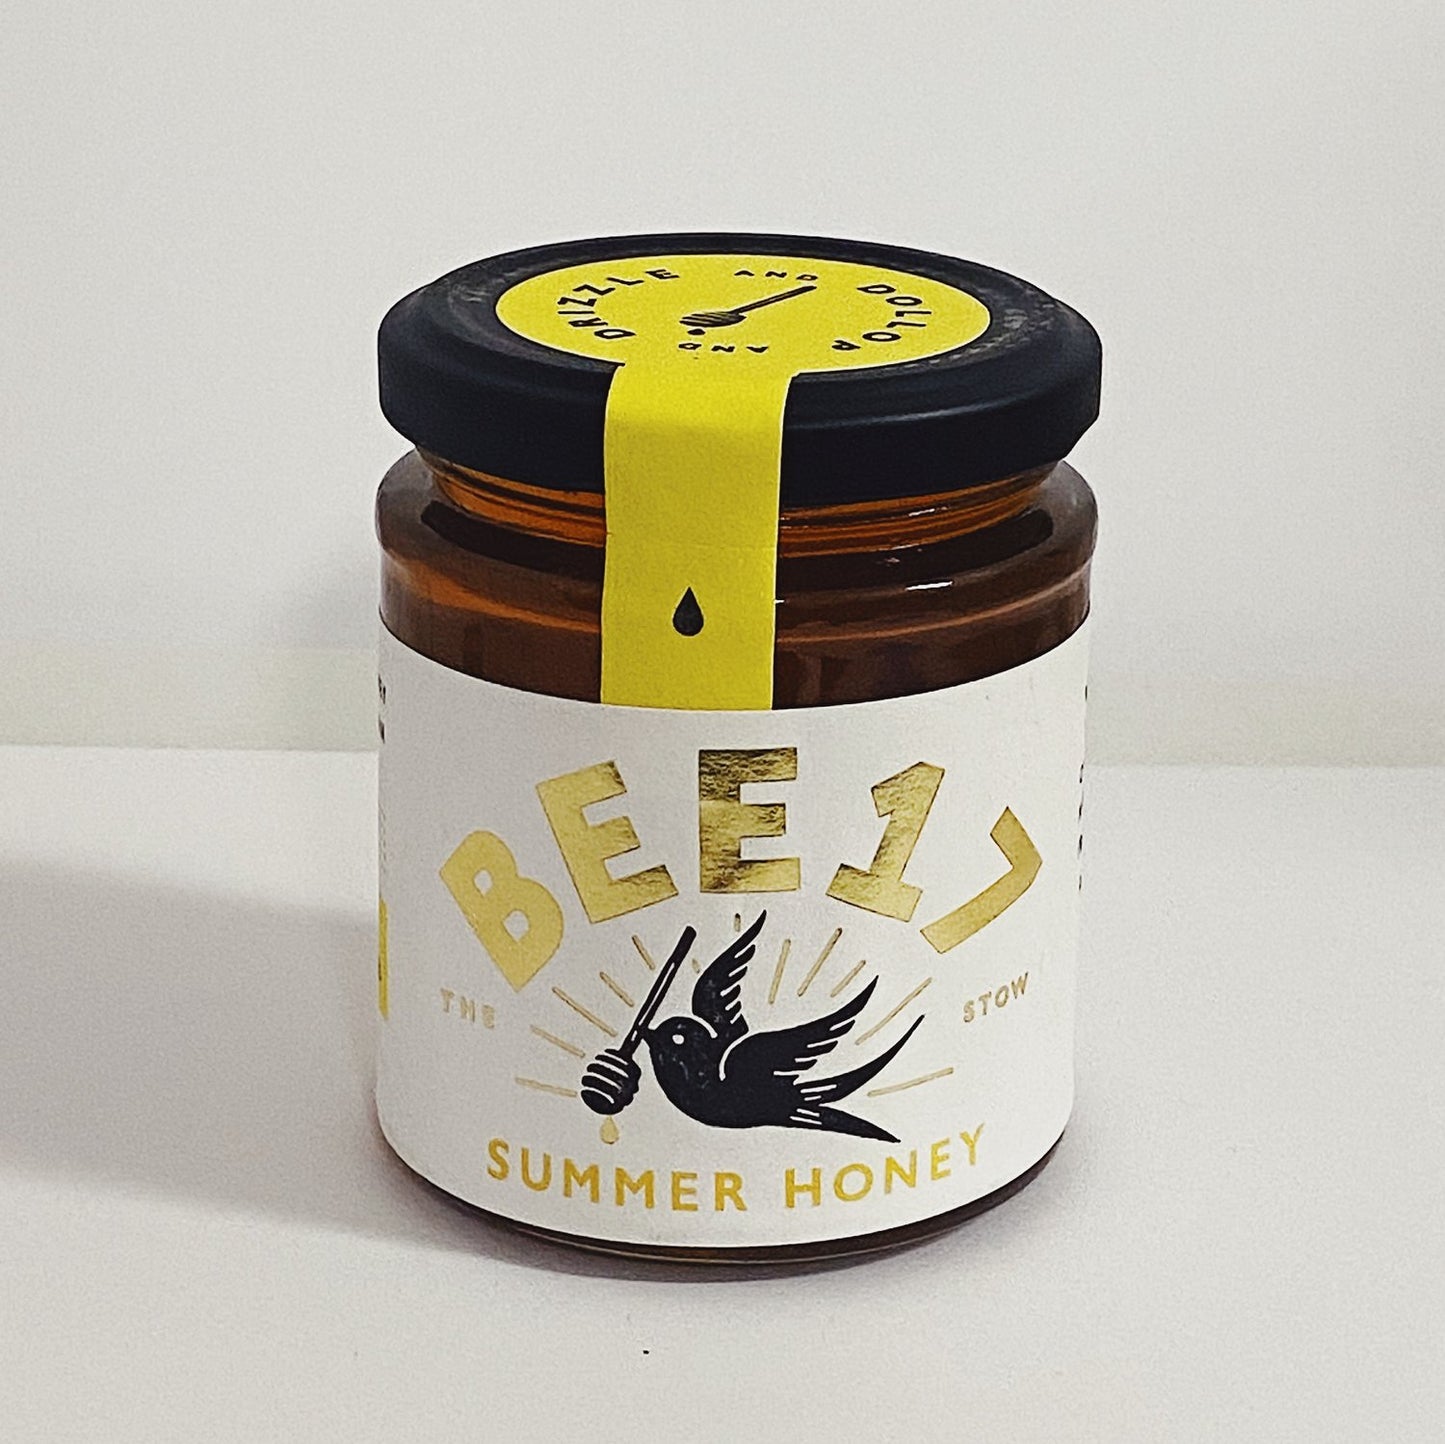 Honey From Walthamstow Bees